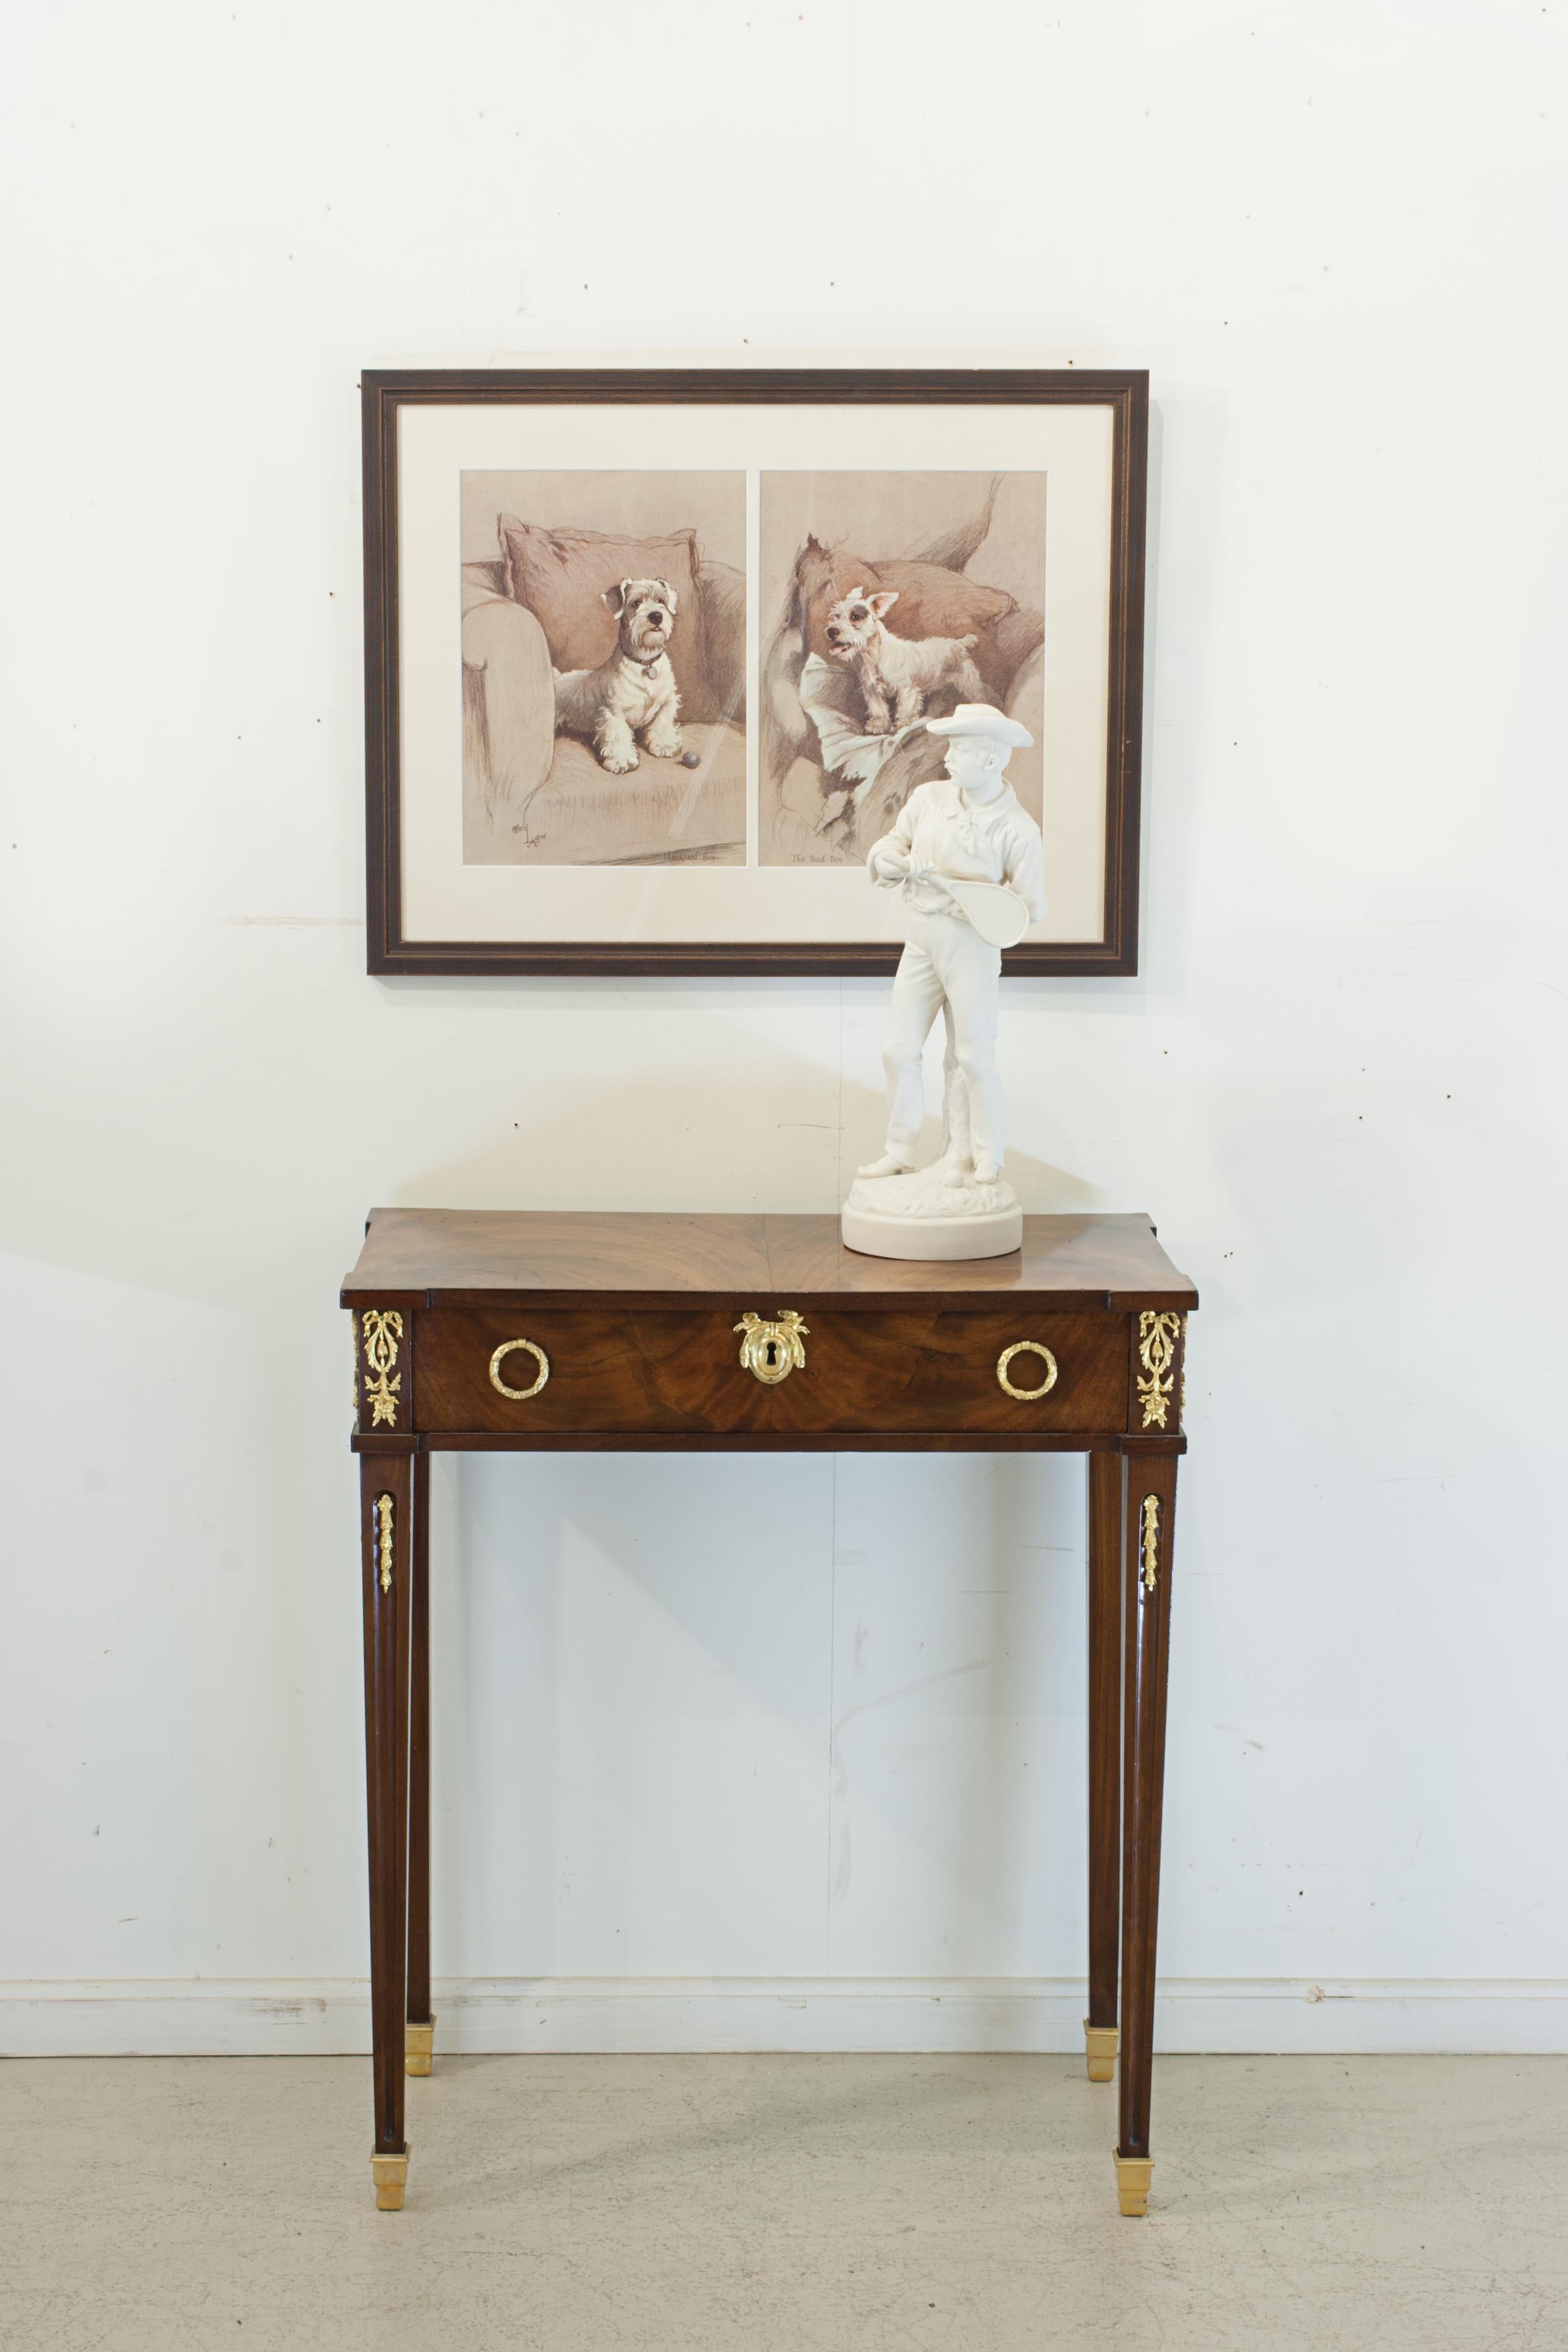 Early 19th century, side table With gilt mounts and handles with single drawer.
A free standing Regency mahogany side table with single oak lined drawer with two gilt metal drop ring handles and decorative keyhole escutcheon plate. A well